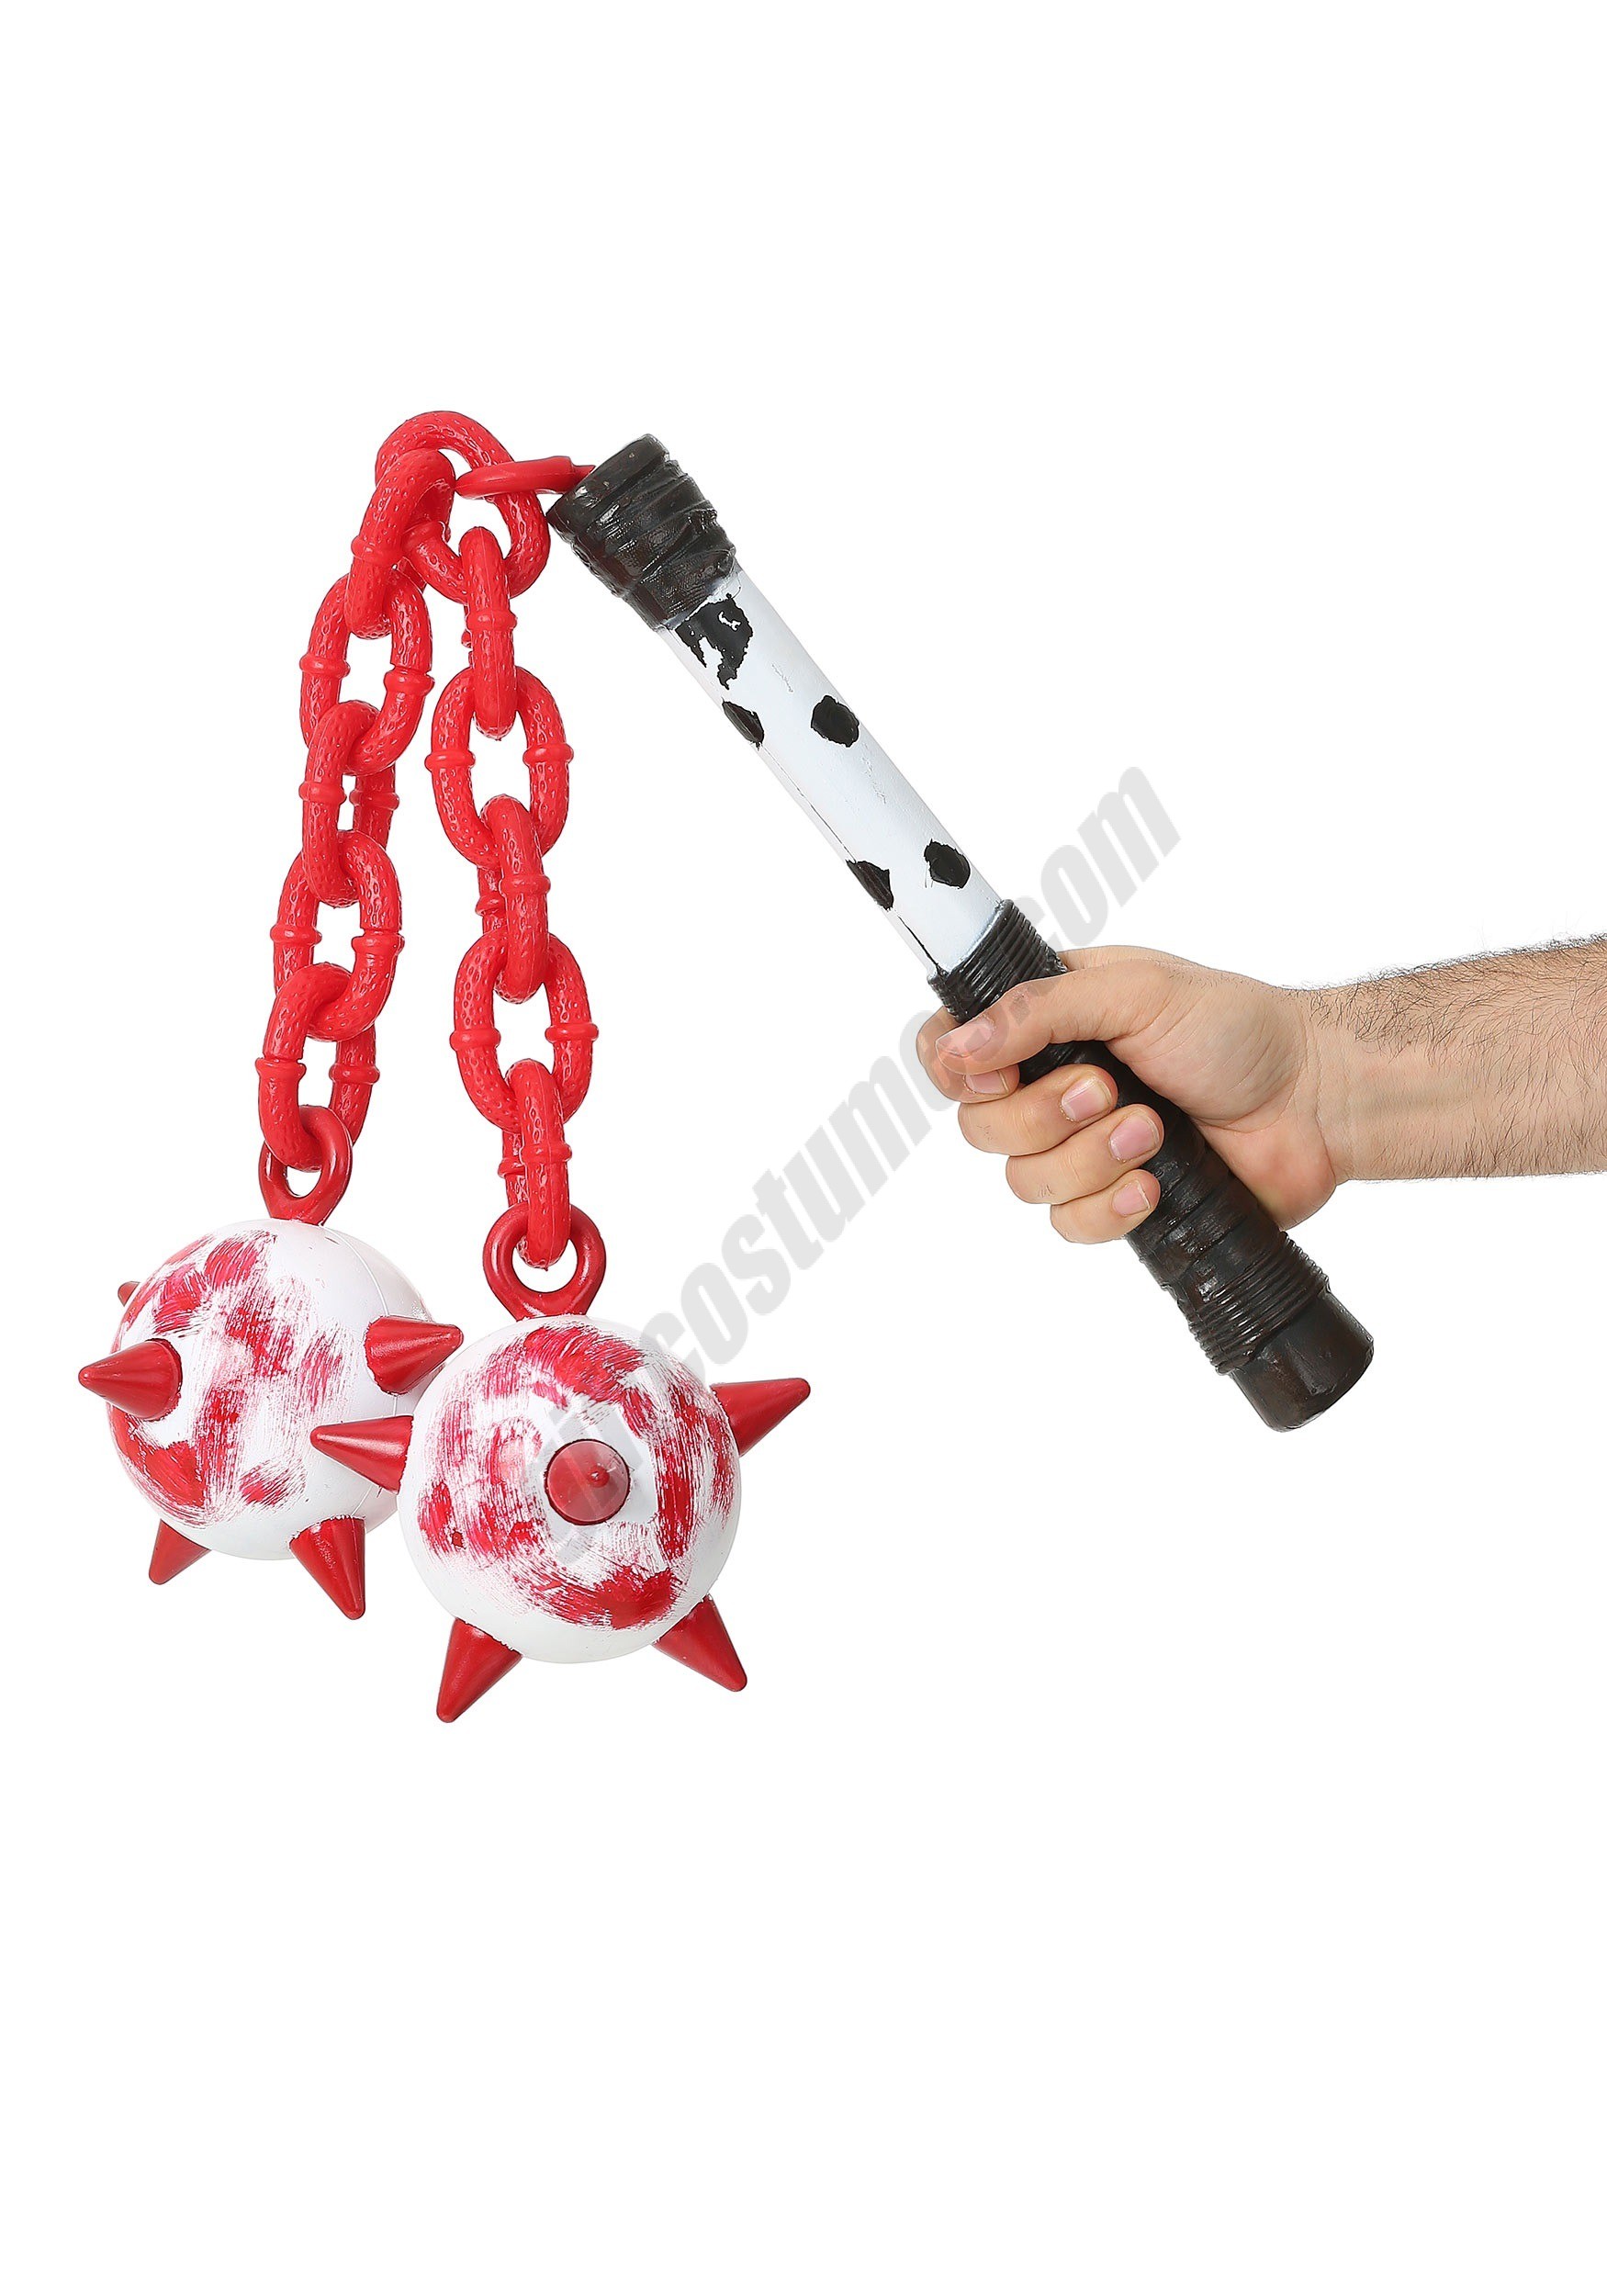 Nightmare Clown Flail Weapon Promotions - Nightmare Clown Flail Weapon Promotions